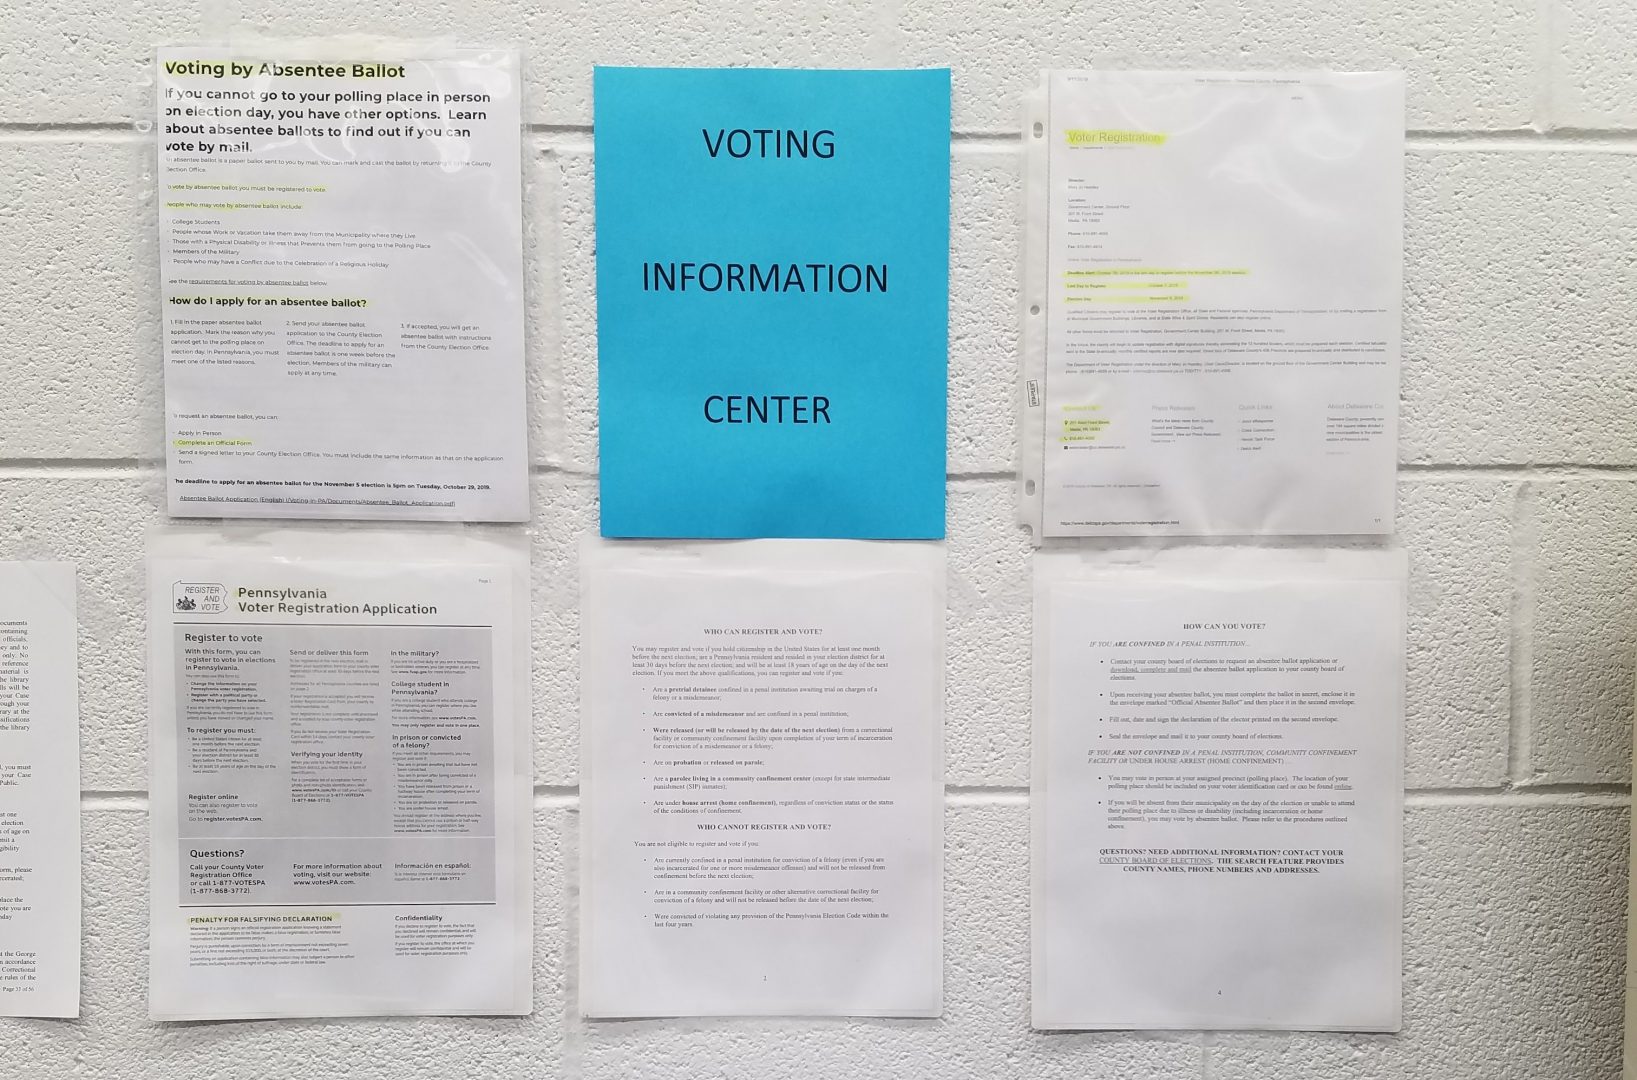 Information about voting is posted in the law library at the the George W. Hill Correctional Facility in Delaware County, Pa.